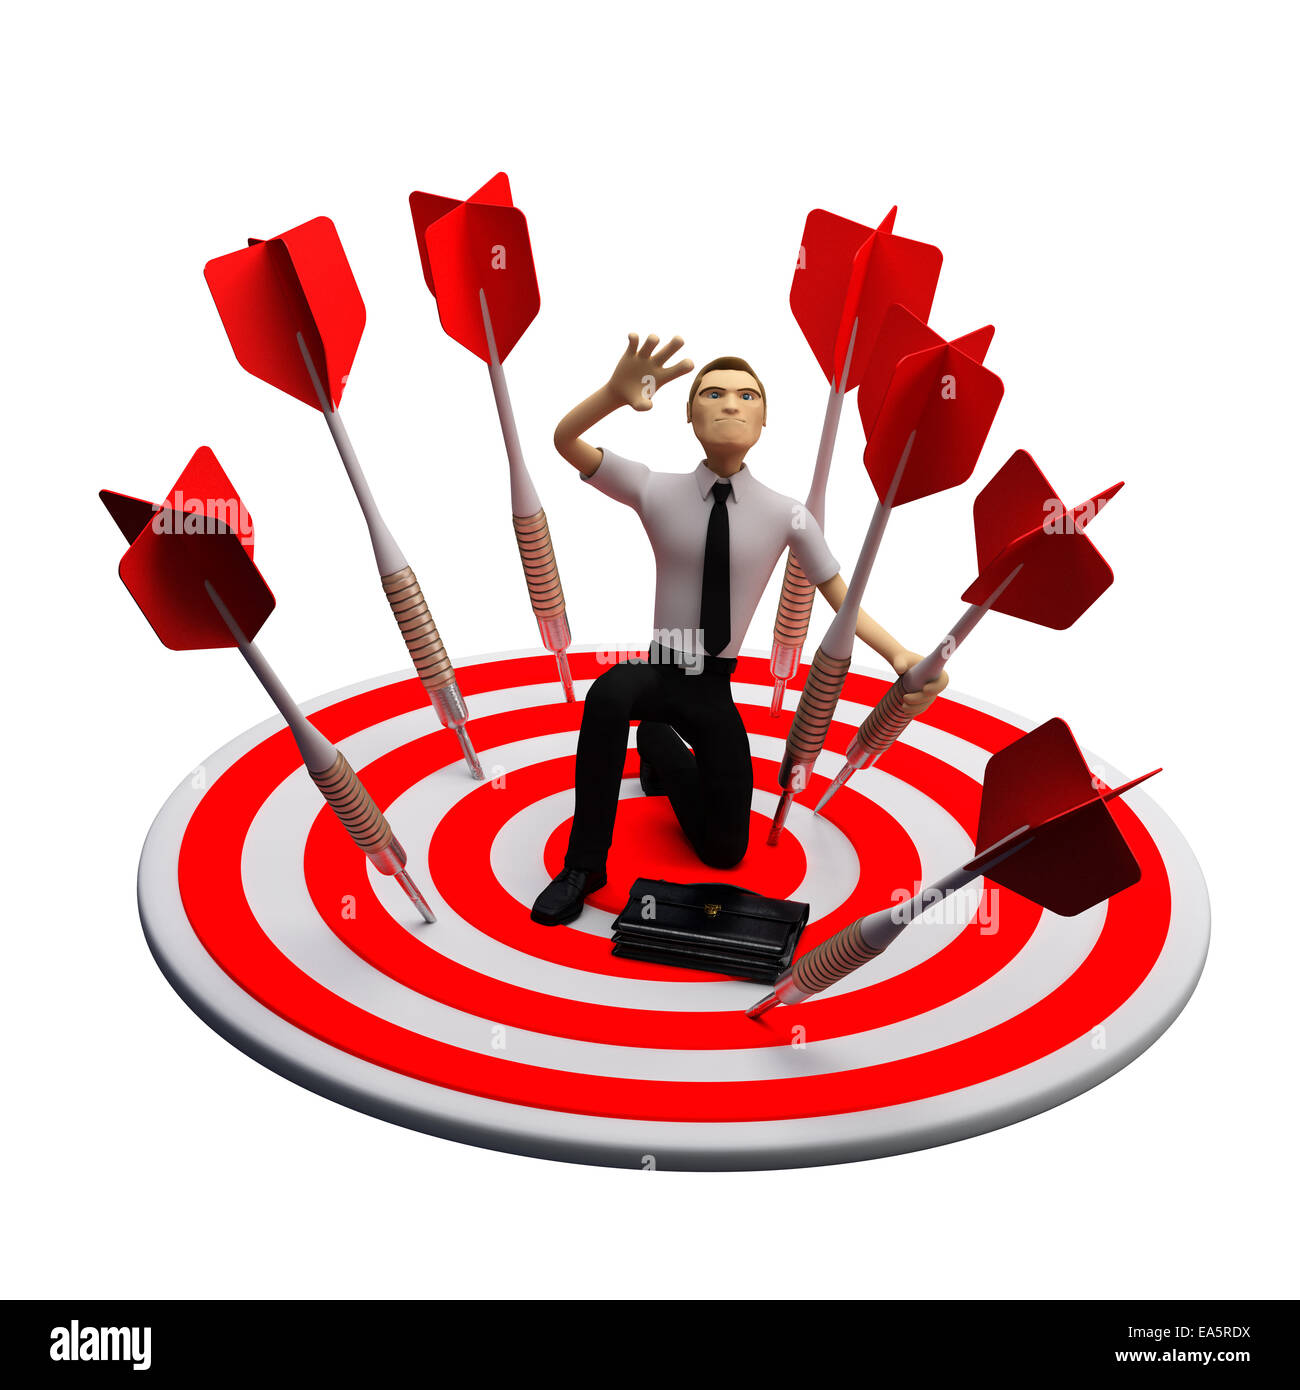 Businassman standing on the archery board. Conceptual business illustration. Isolated on white Stock Photo